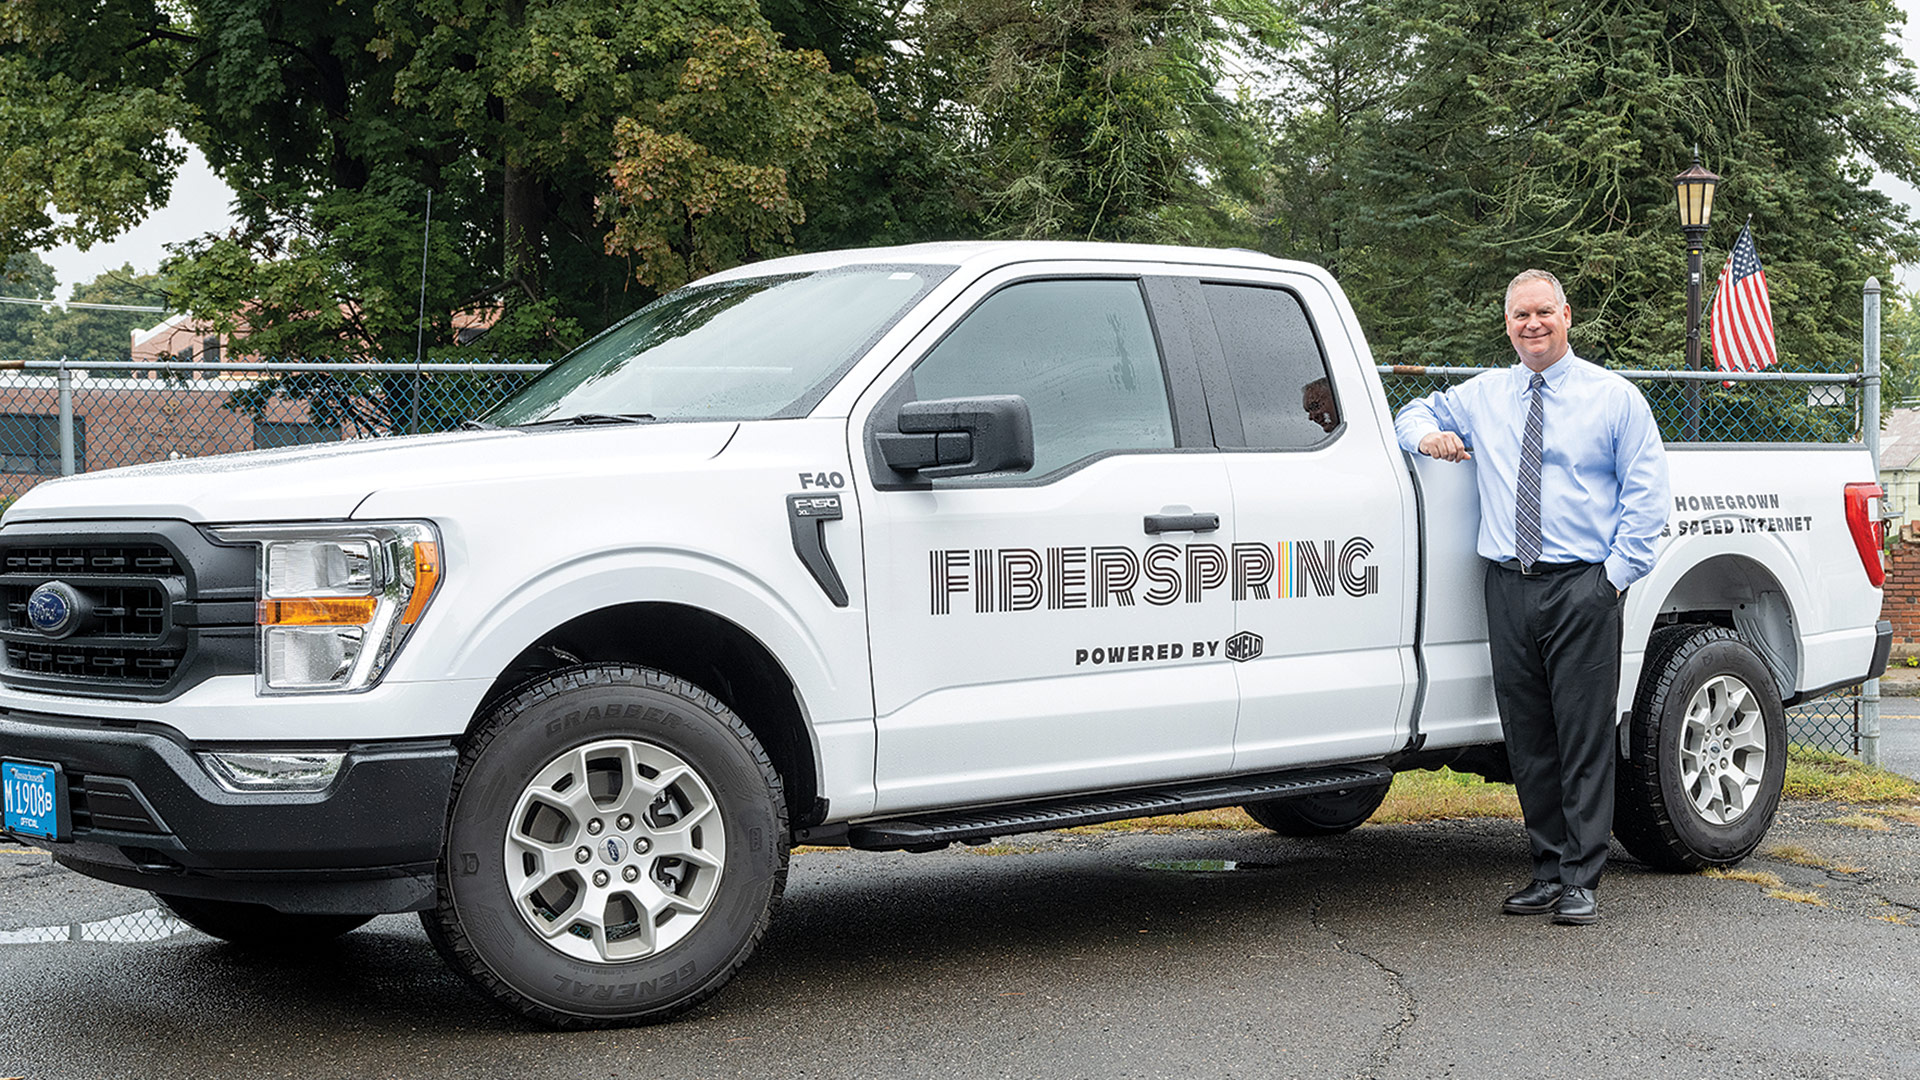 one of utility’s trucks with the new brand, Fiberspring